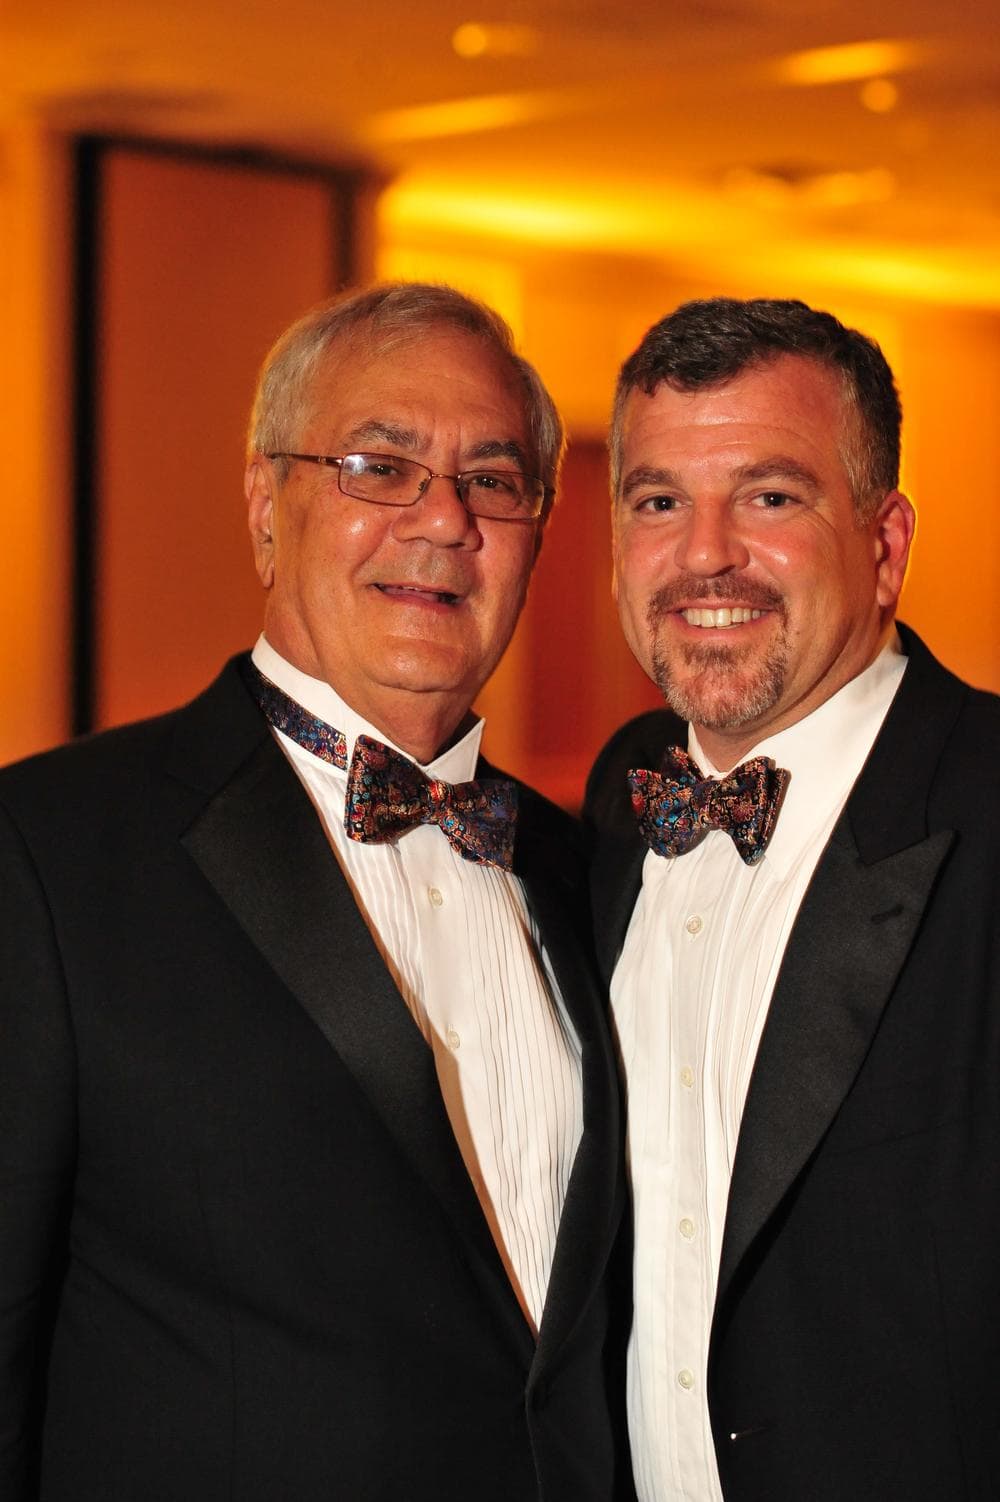 Rep. Barney Frank, left, married his longtime partner Jim Ready in Newton Saturday night. (AP)